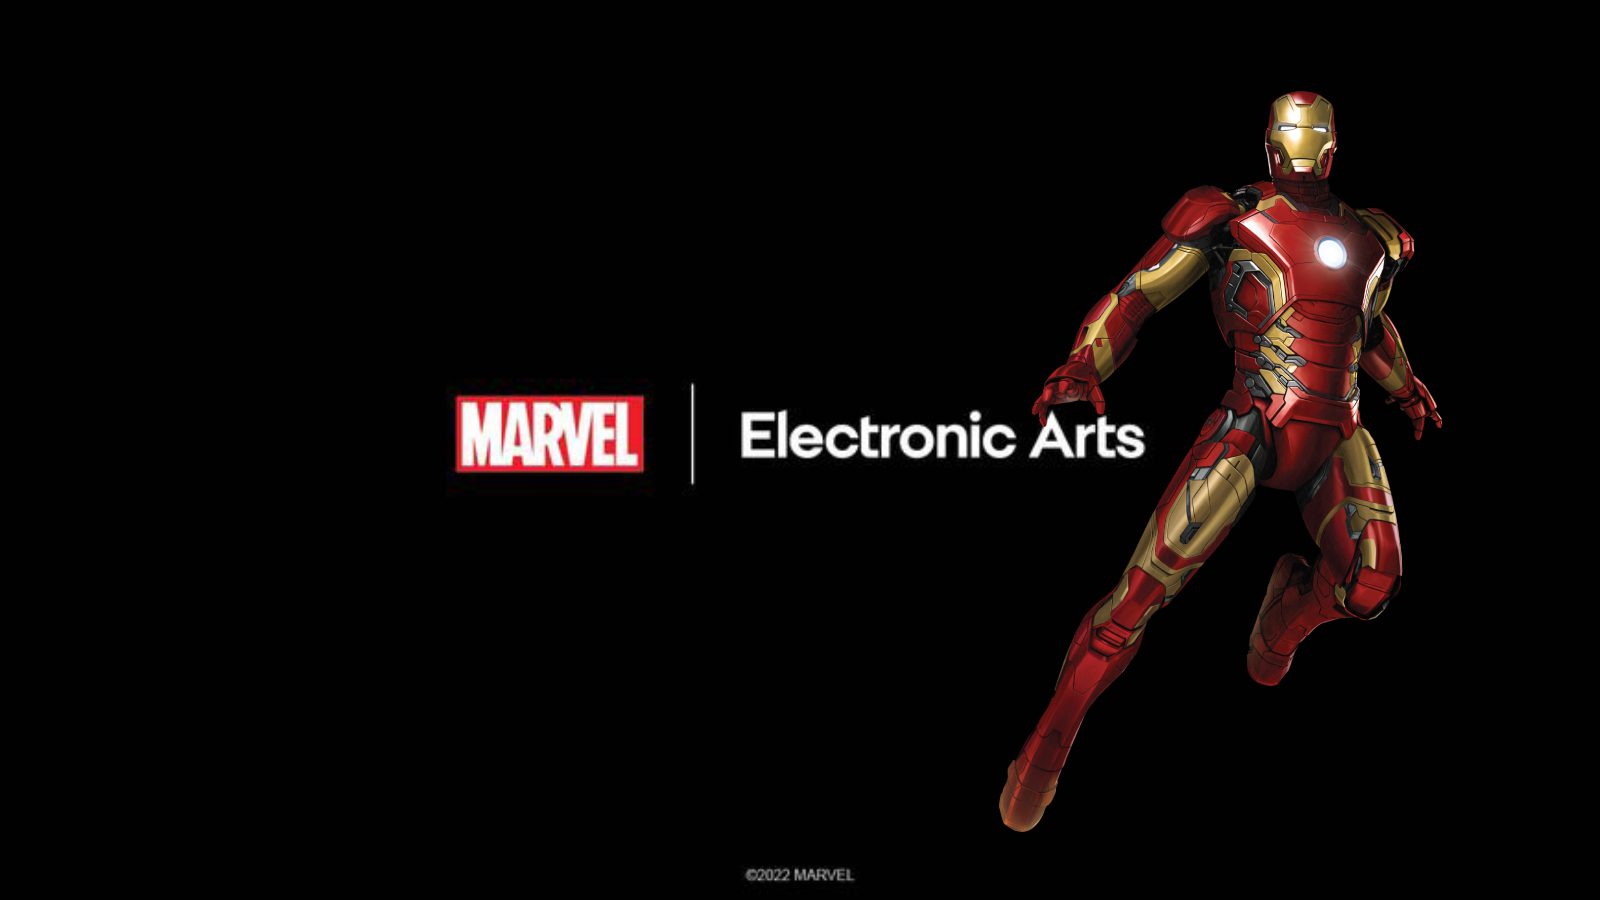 EA is developing new action adventure Marvel games for PC and console